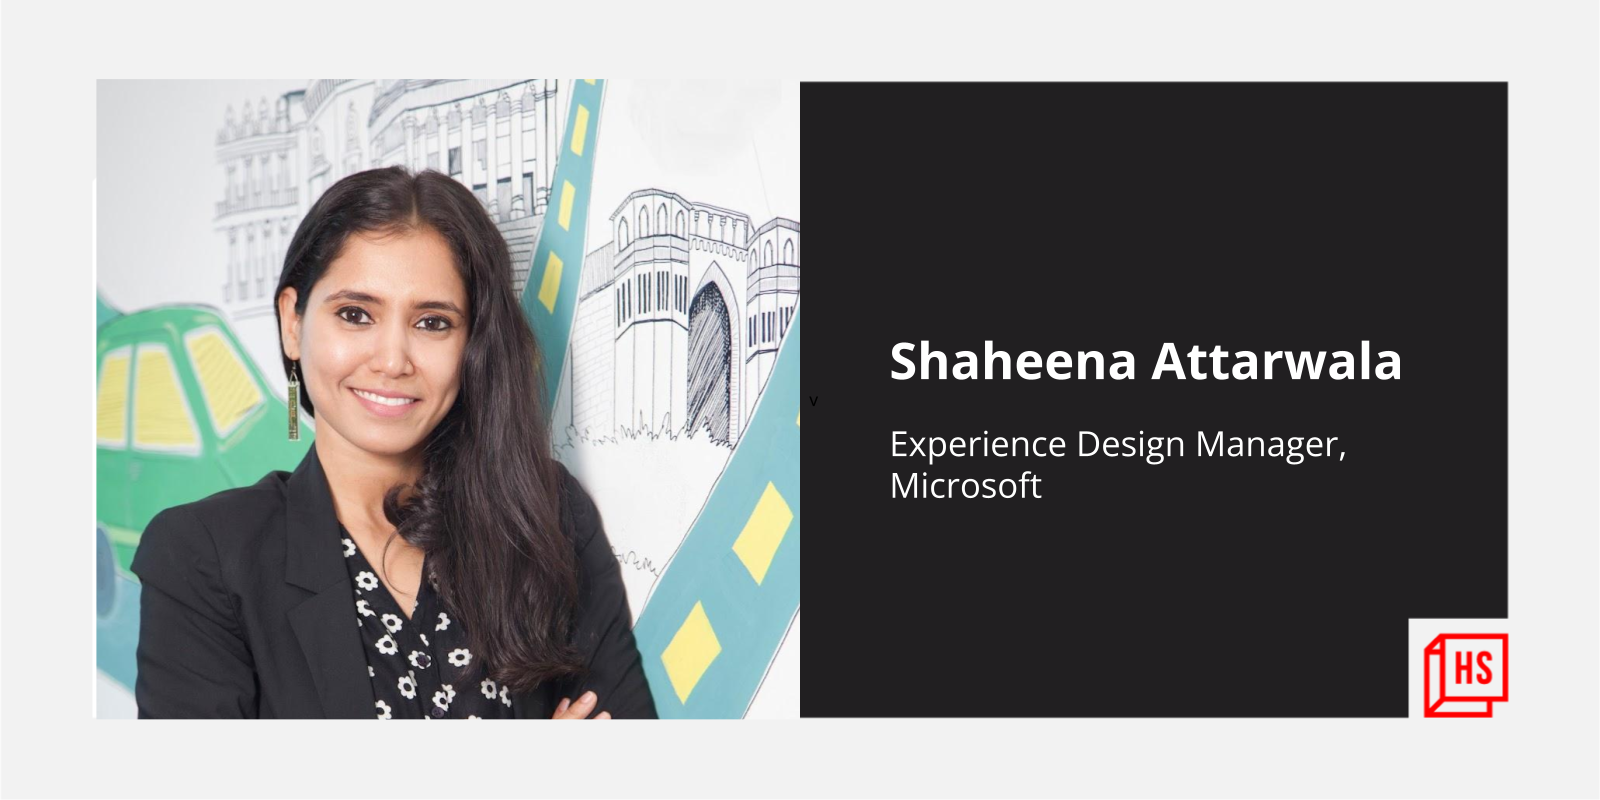 From a childhood in Mumbai's slums to working at Microsoft and empowering others: Story of Shaheena Attarwala